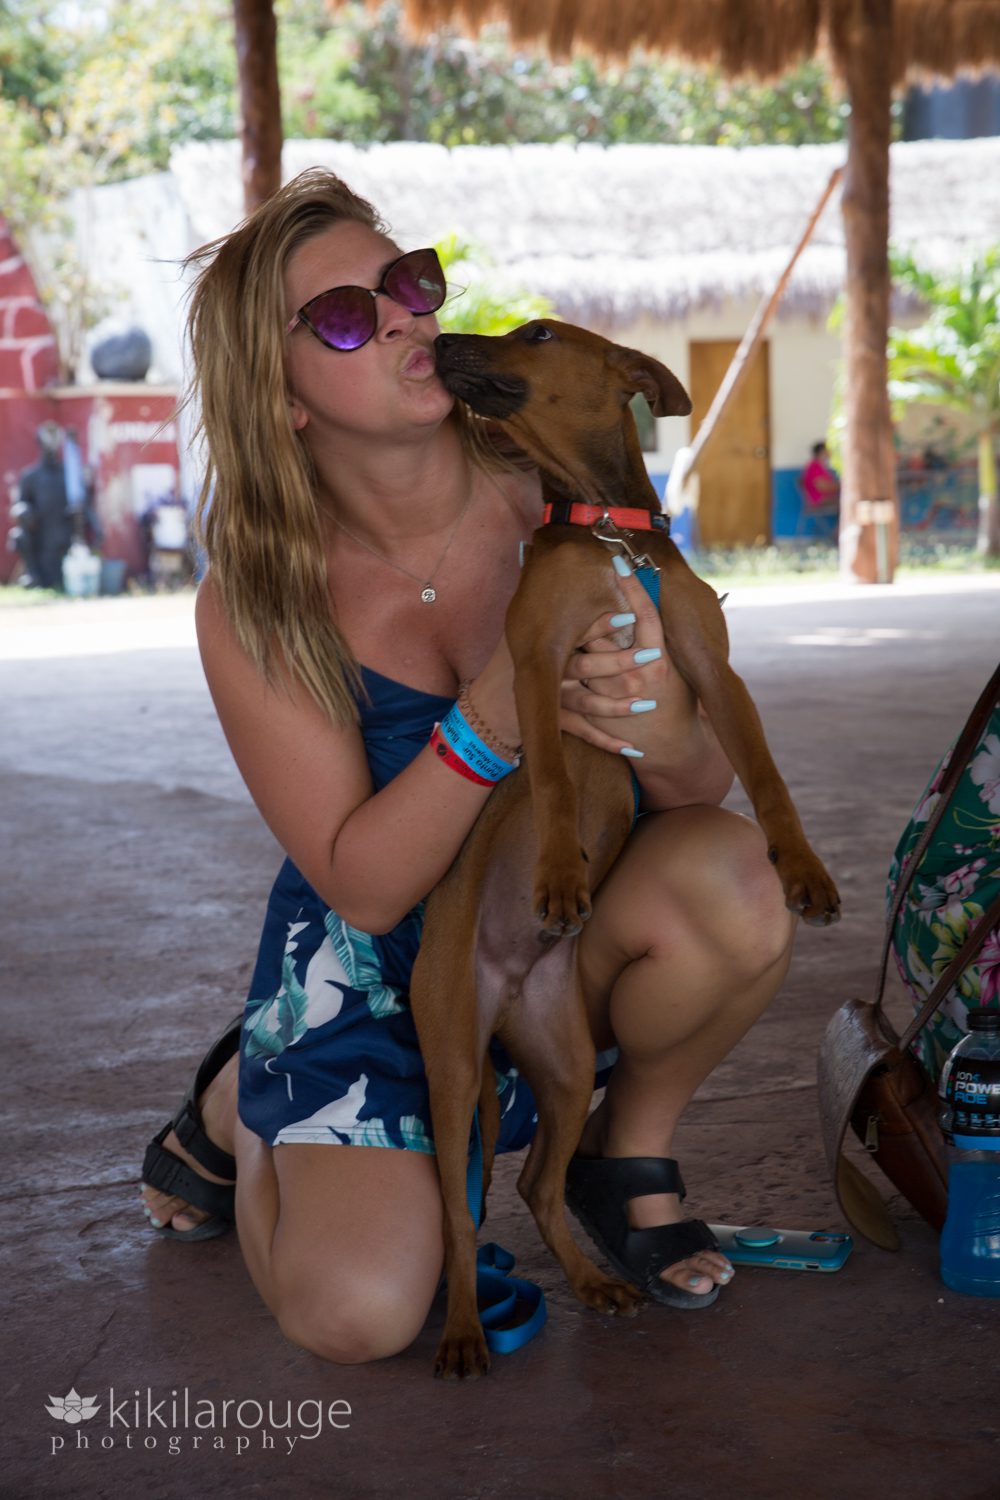 Girl with sunglass and tropical dress kissing a brown rescue pup in gazebo